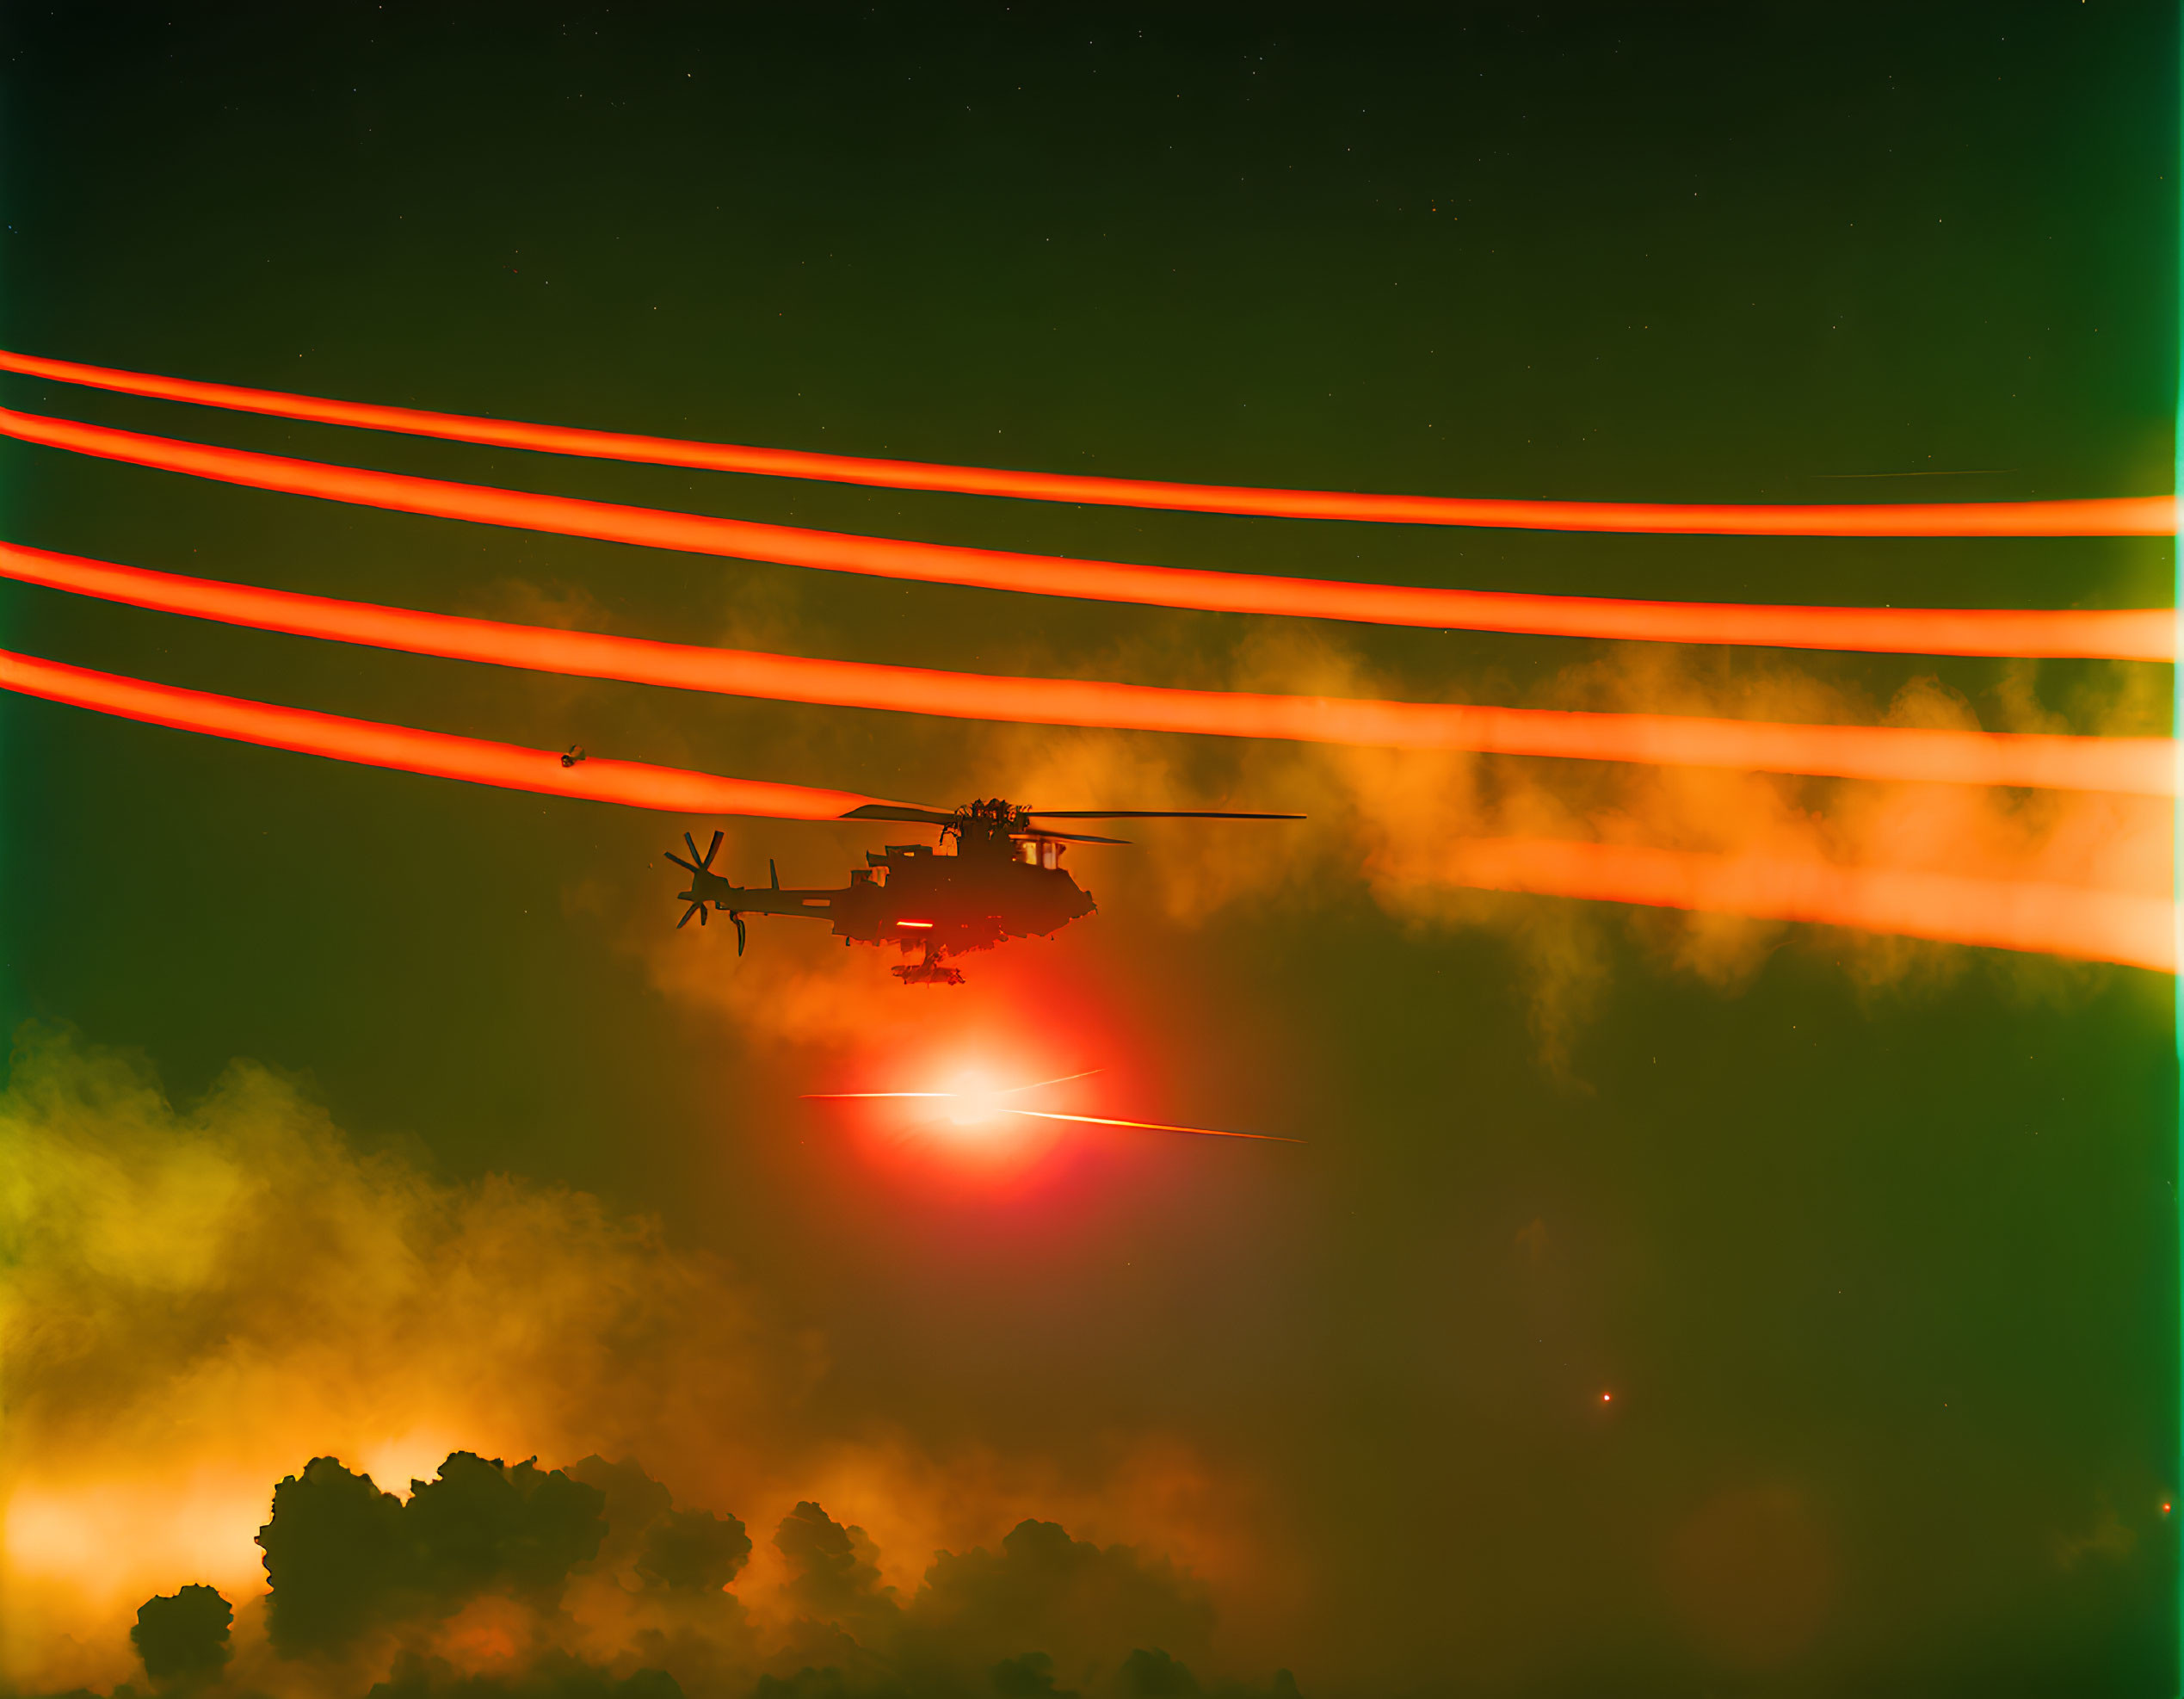 Helicopter with Glowing Red Lights in Smoky Dusk Sky